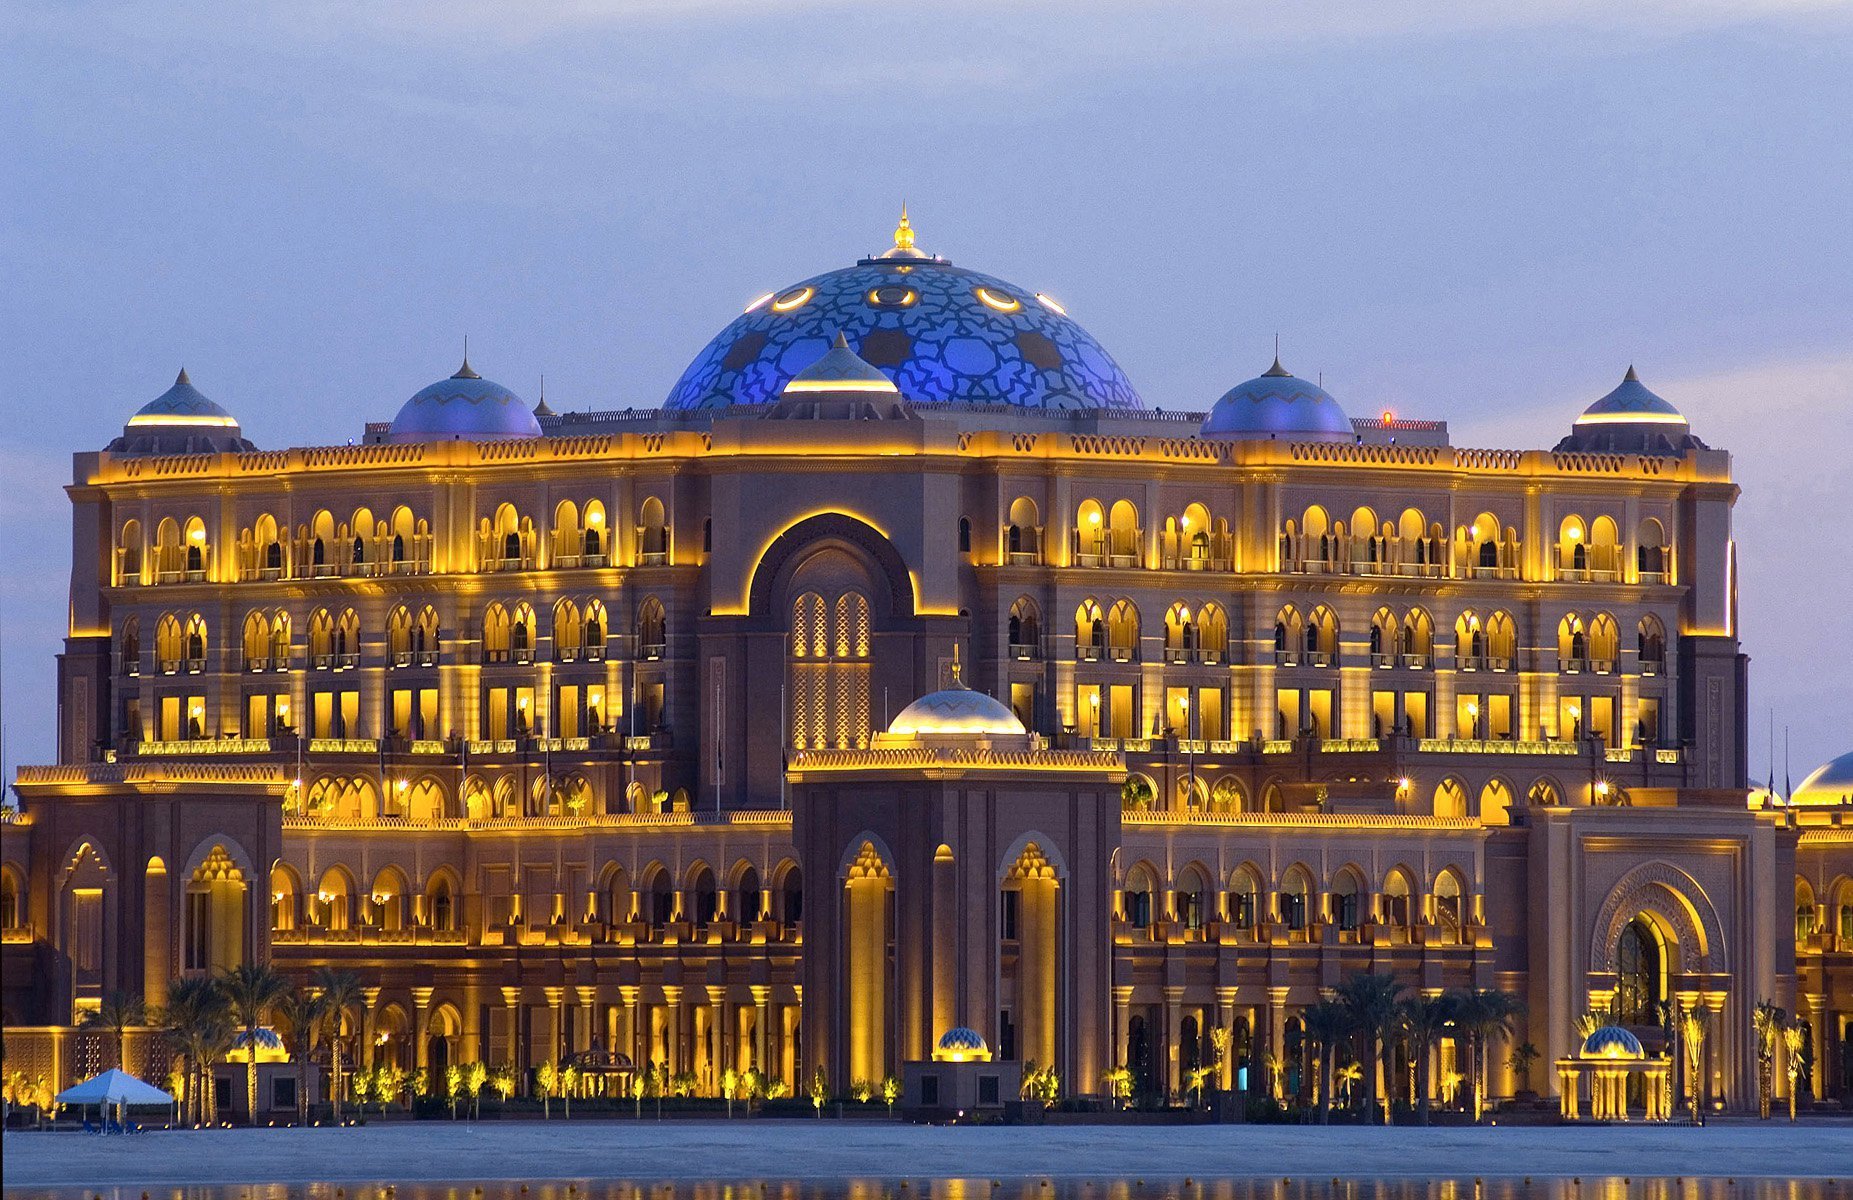 40 Amazing Shots Of Hotels From Around The World That Give ‘Luxury’ A Whole New Meaning